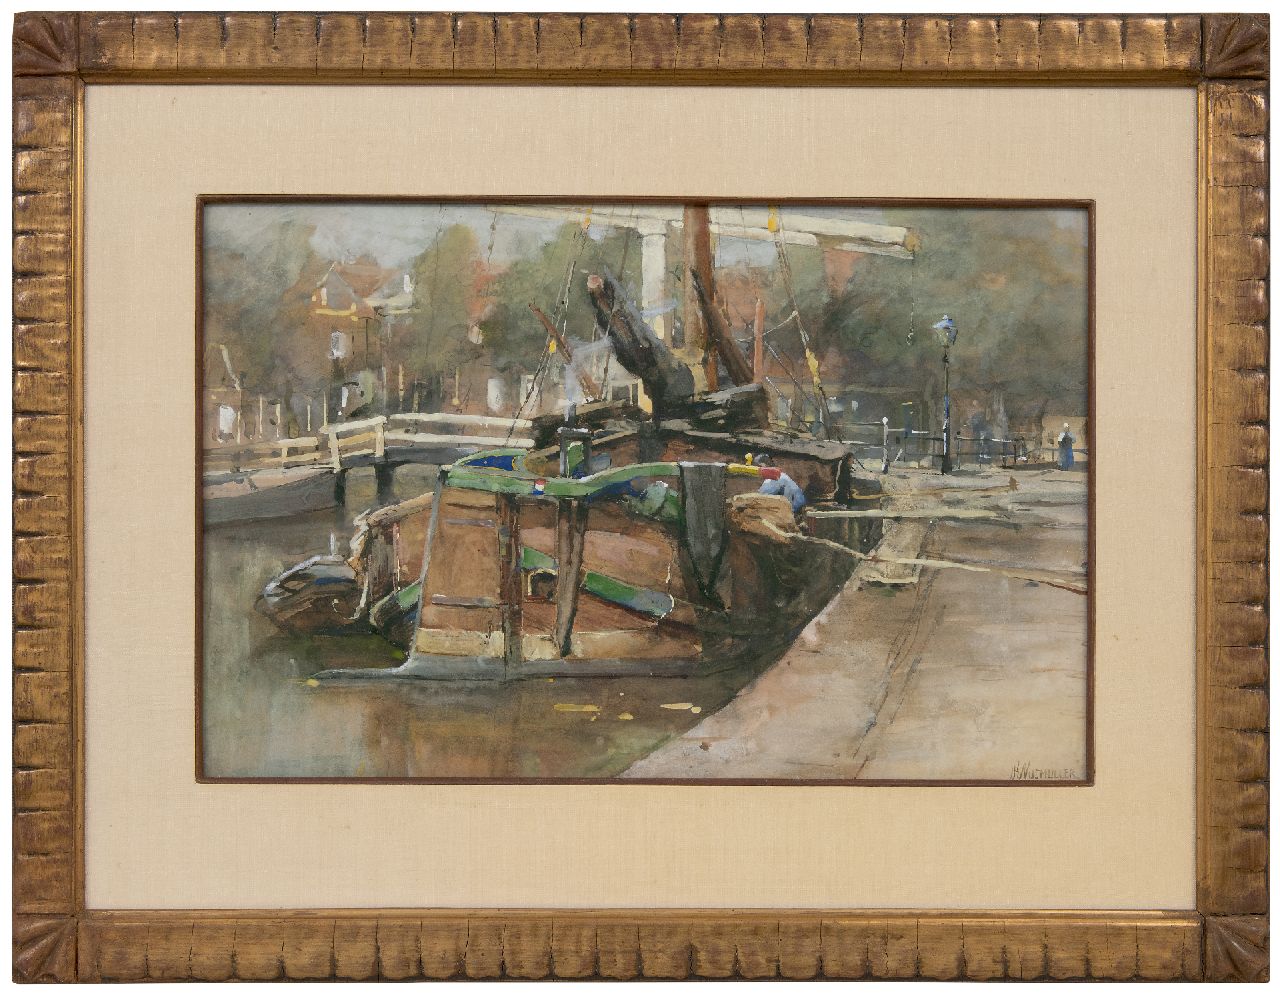 Wijsmuller J.H.  | Jan Hillebrand Wijsmuller | Watercolours and drawings offered for sale | Moored tjalk at the quay, watercolour on paper 33.5 x 51.0 cm, signed l.r.